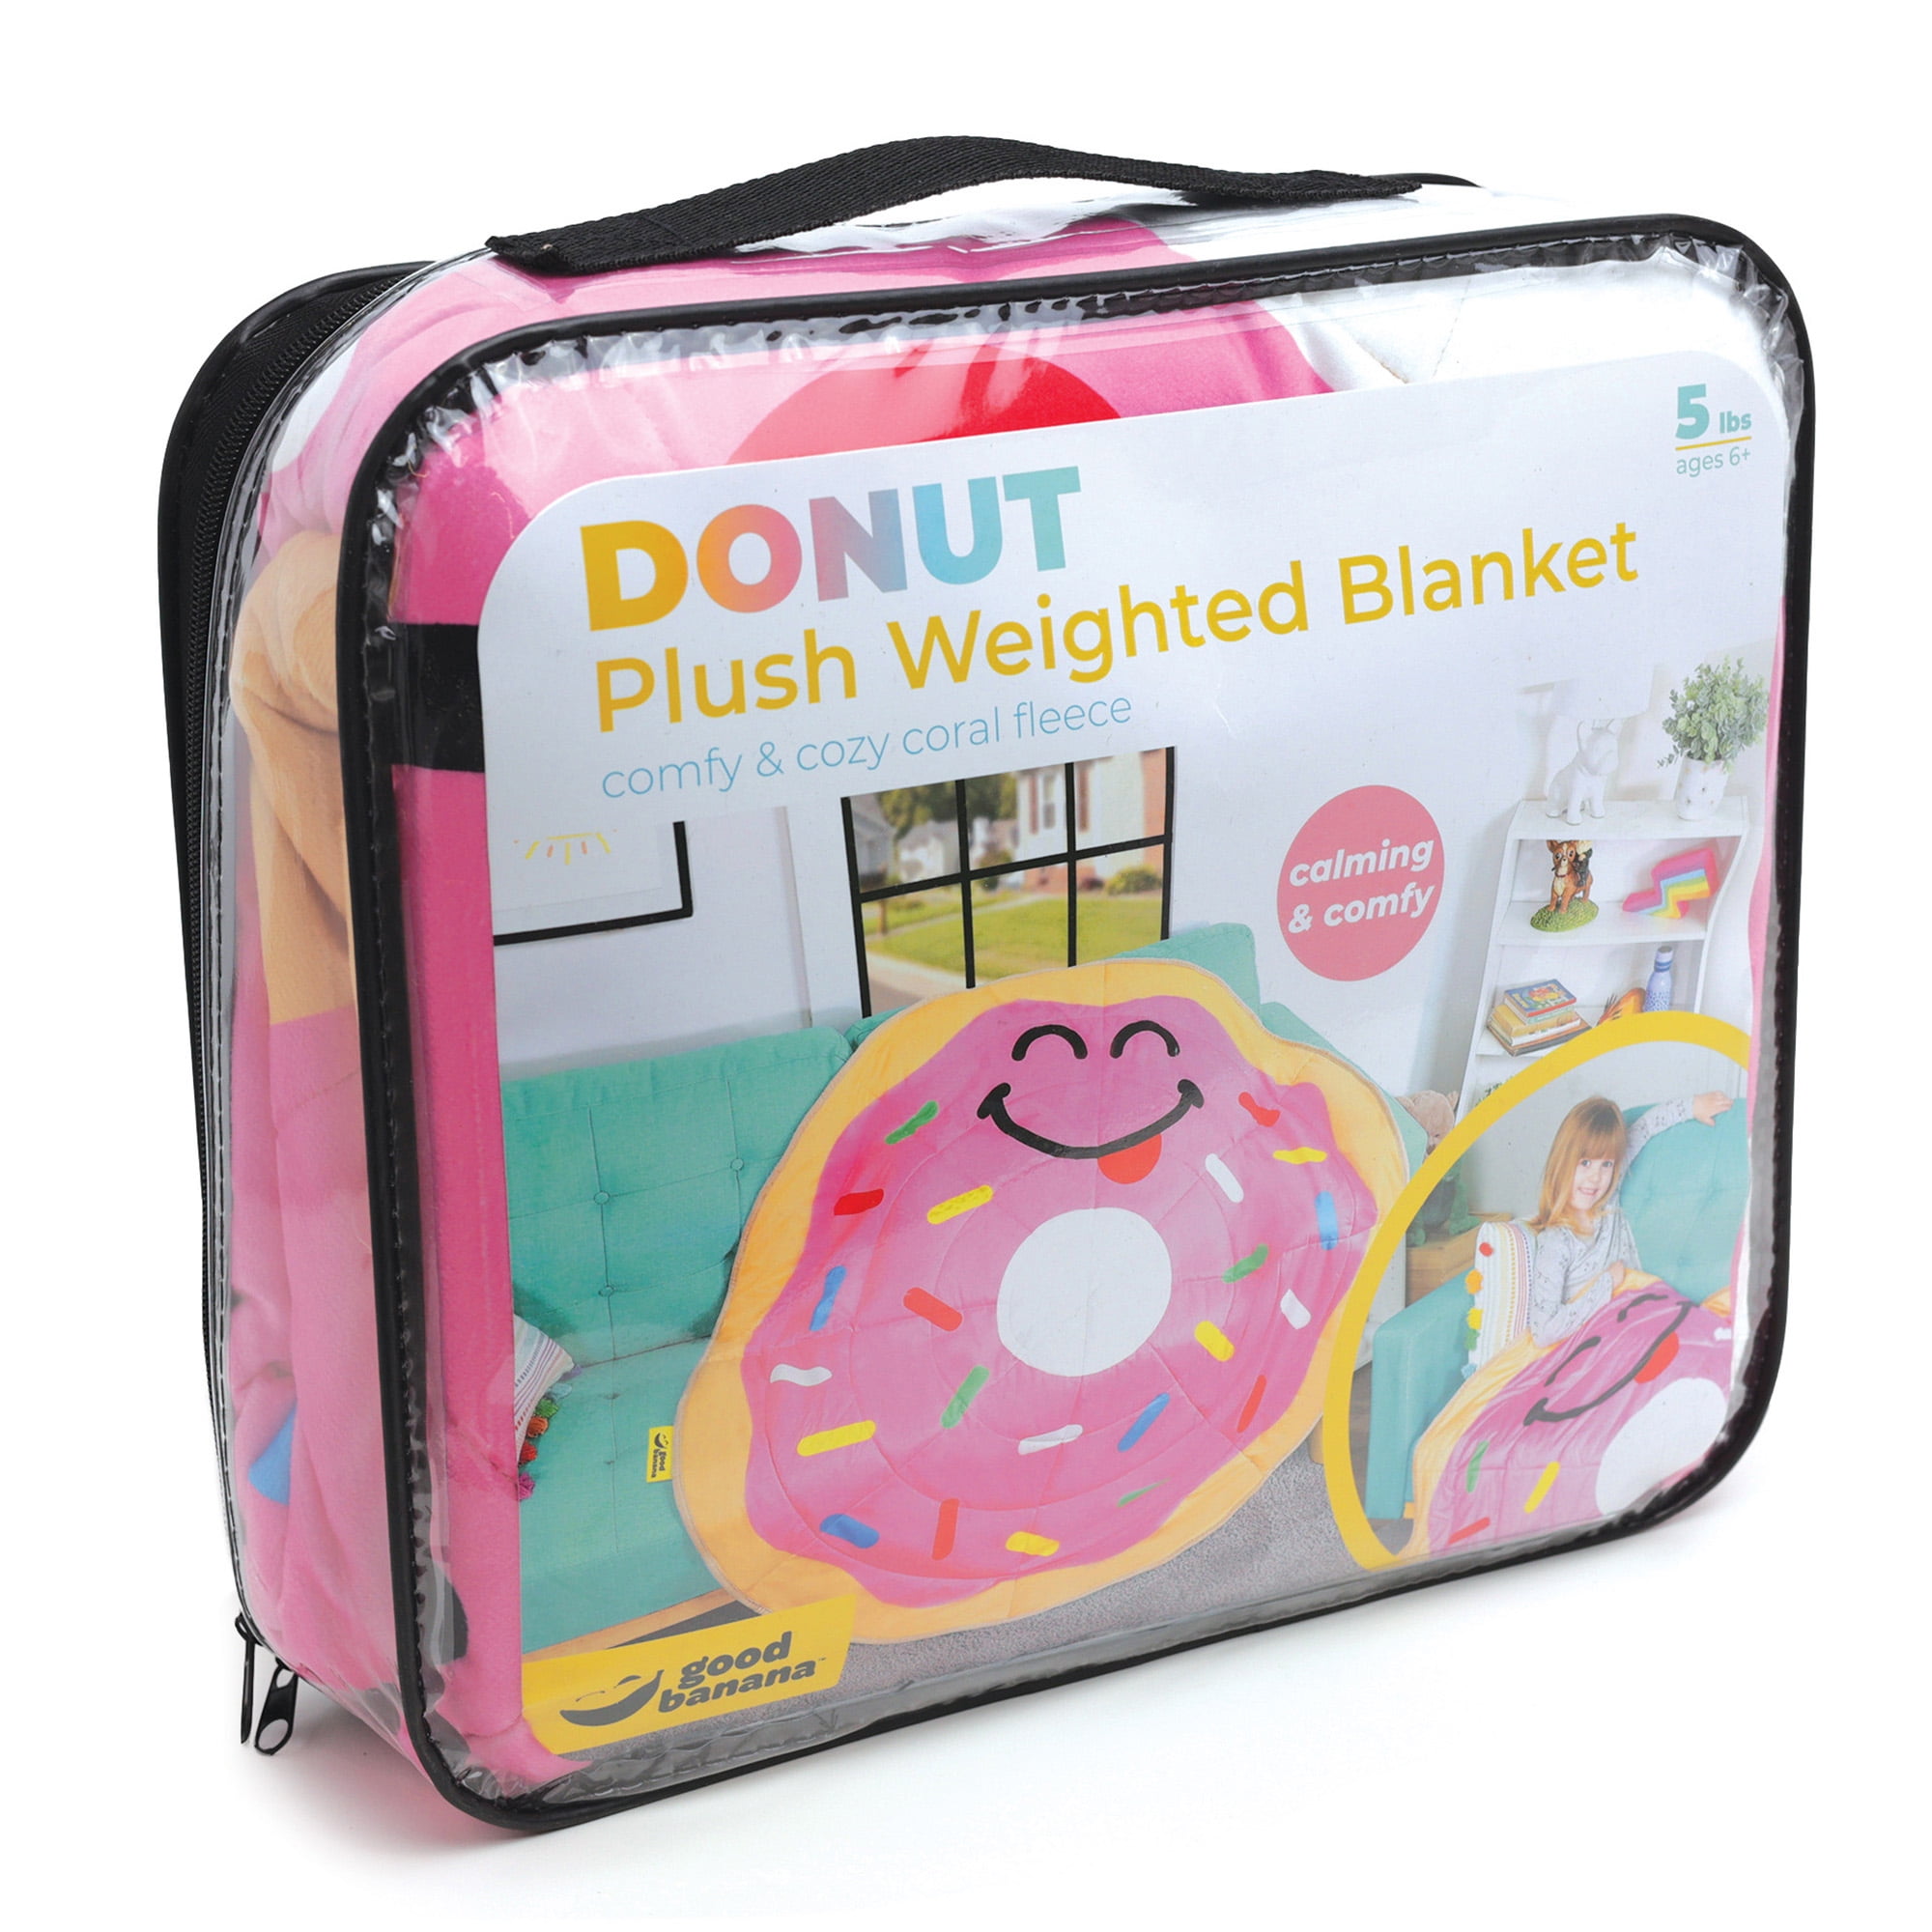 Durable Grid Stitching Even Weight Dispersion 5 lbs GOOD BANANA Kids’ Donut Weighted Blanket Calming Cozy Thick Relaxing Nap Time and Sleep Whole-Body Comfort Cloud-Like Coral Fleece Soft